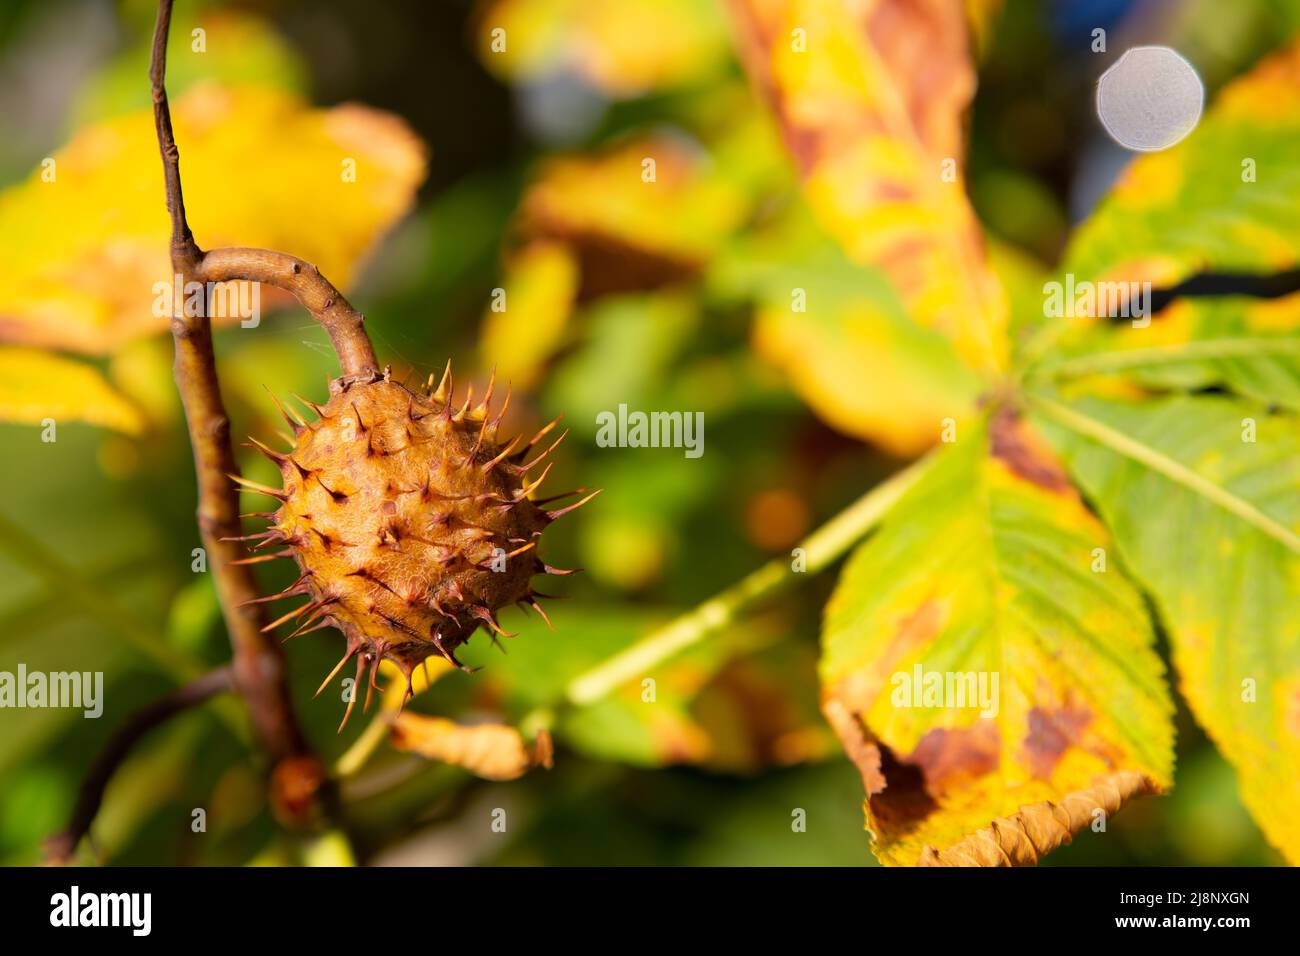 Autumnal chestnut tree (Aesculus) leaves and fruit in backlighting Stock Photo